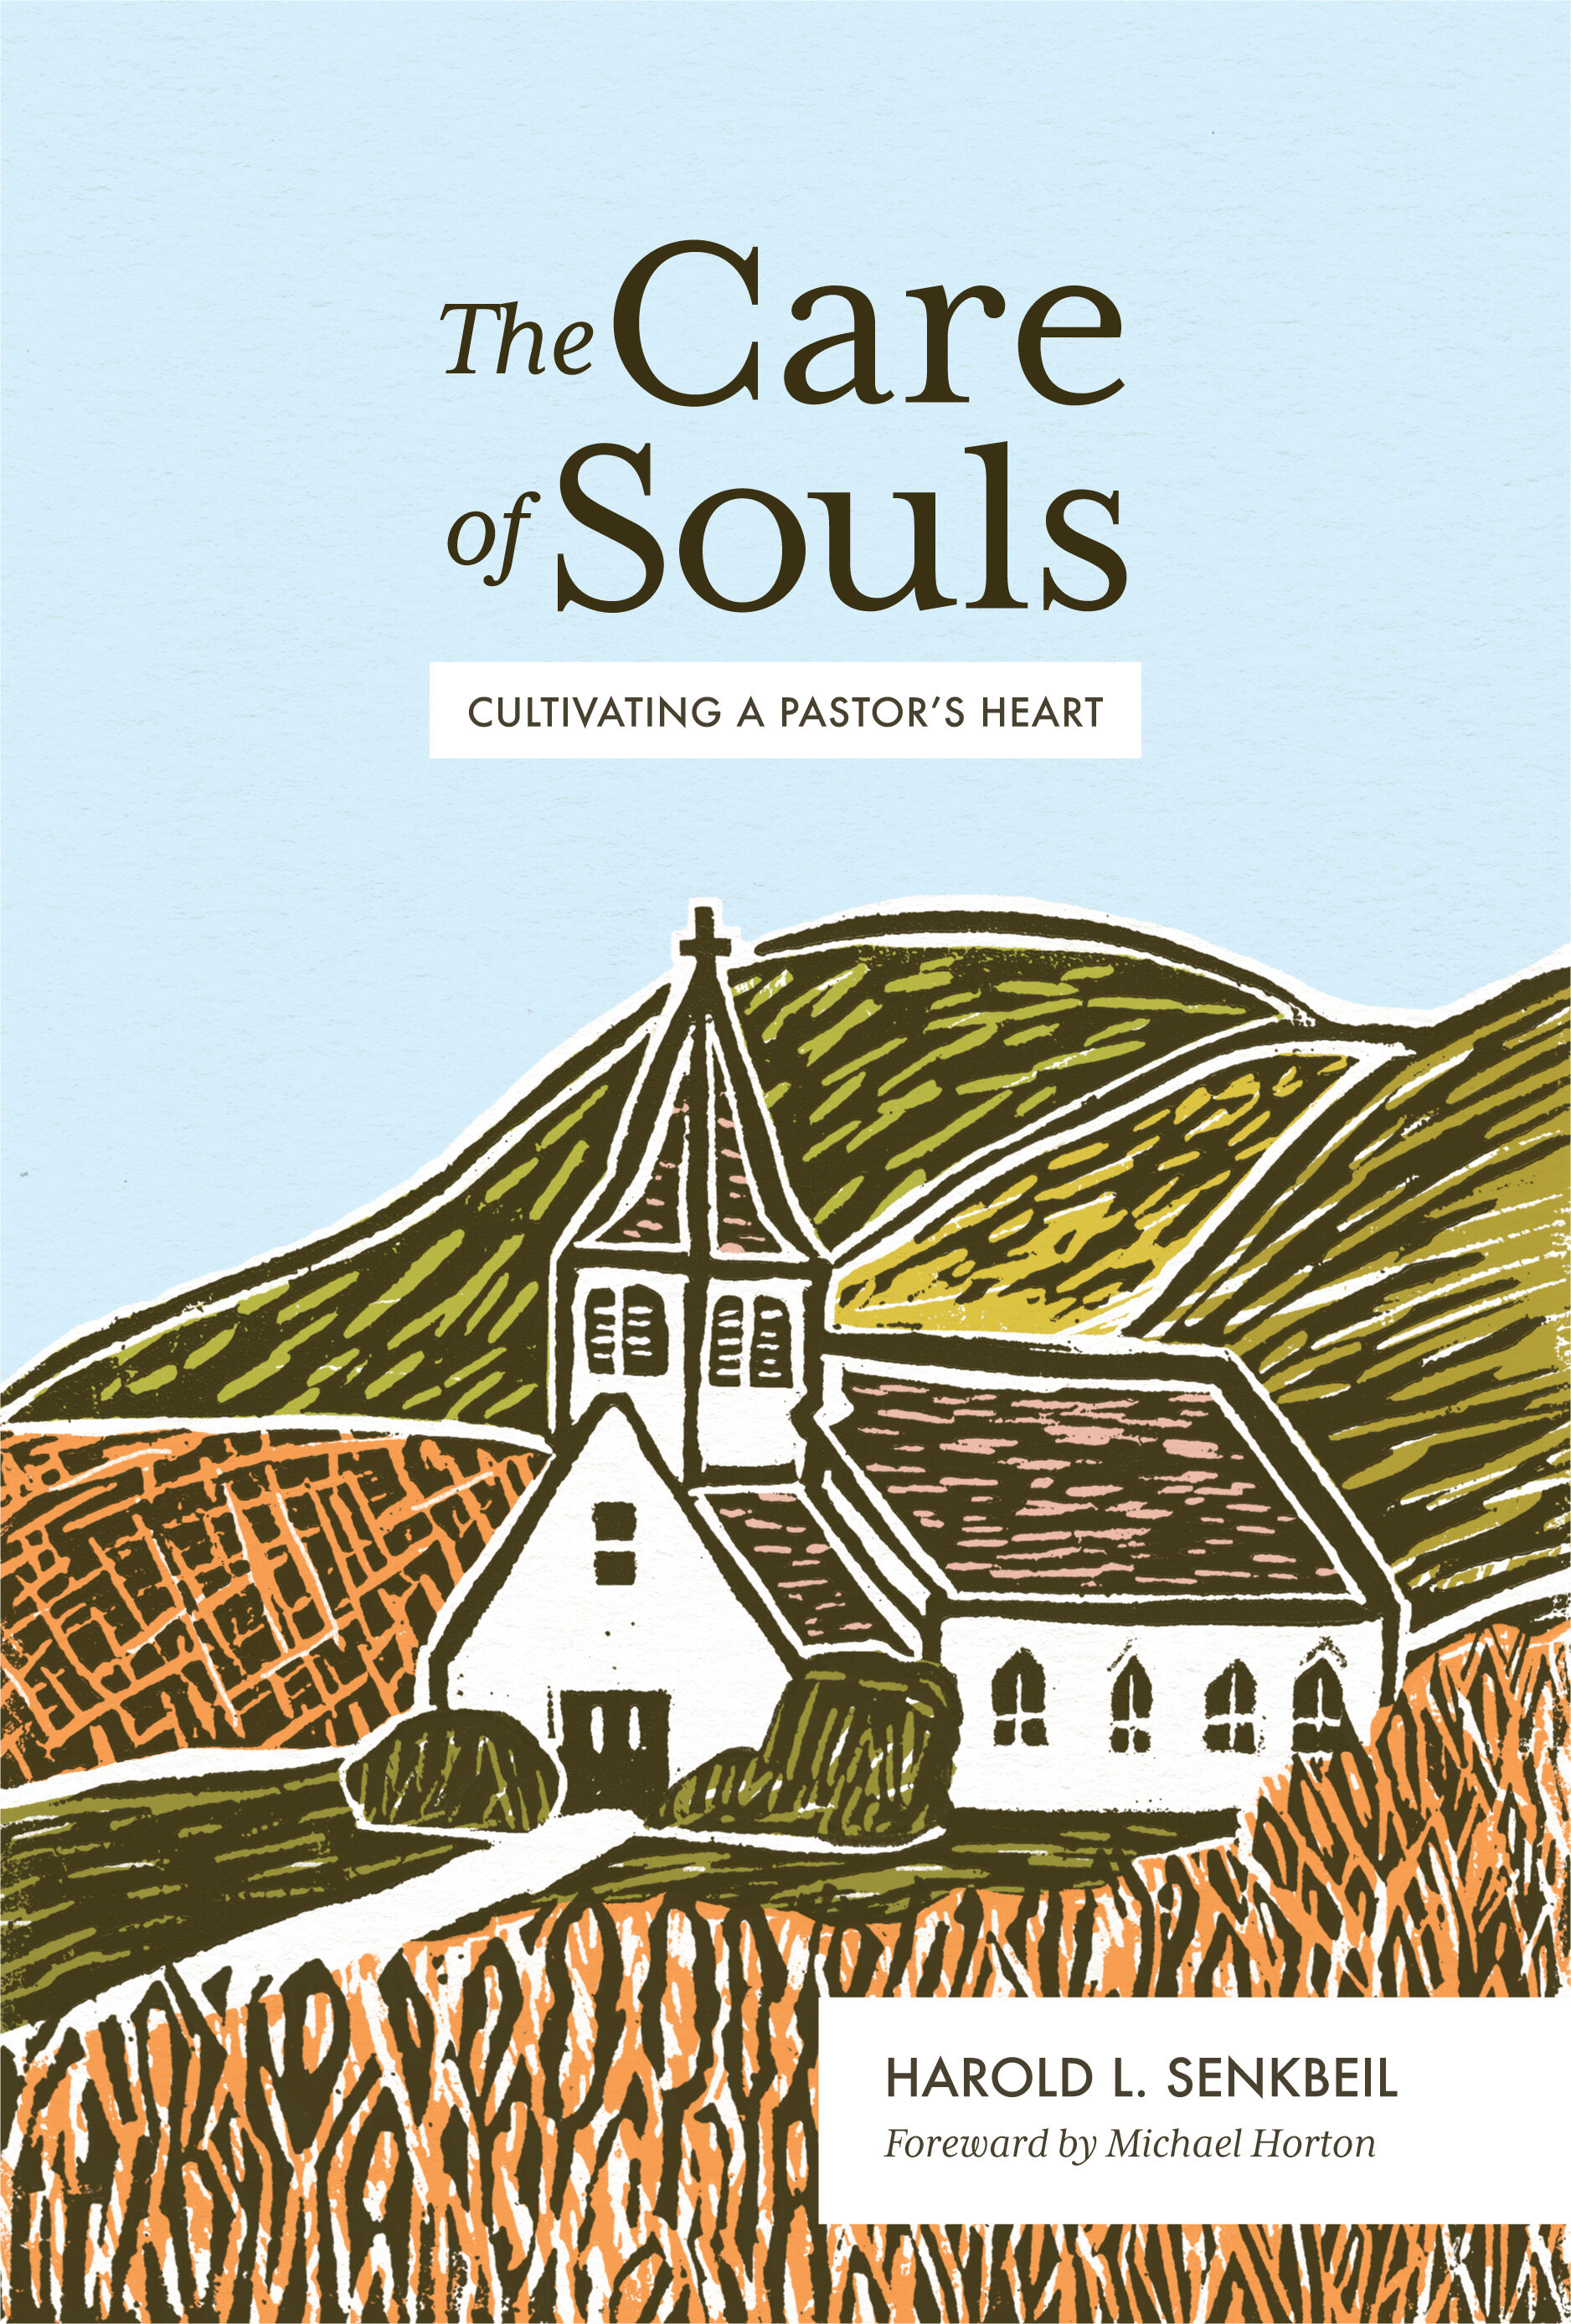 The Care of Souls: Cultivating a Pastor’s Heart